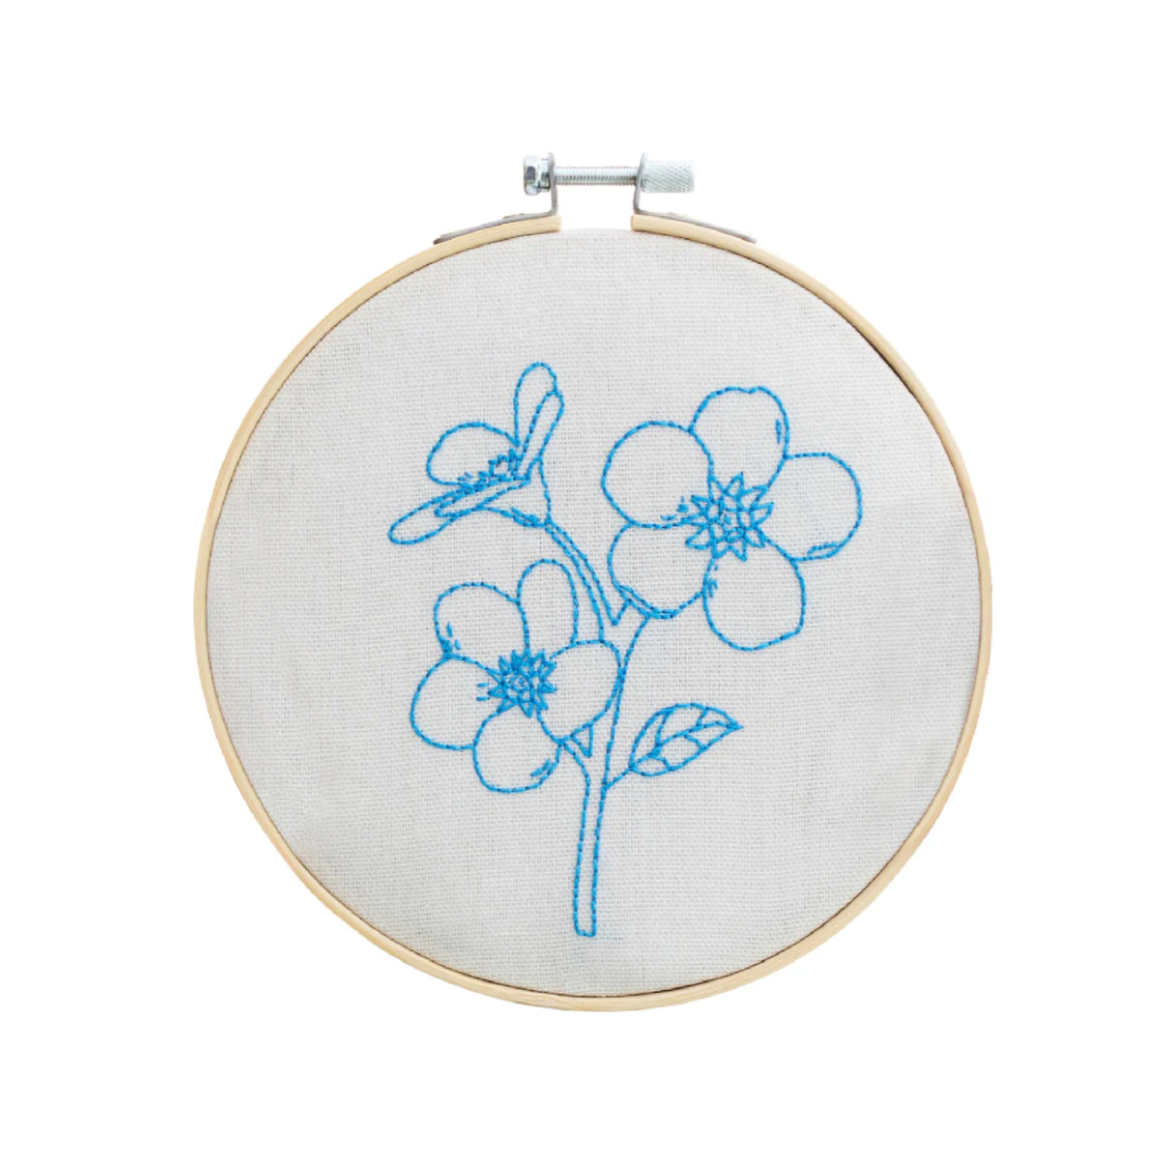 Embroidery hoop of a white piece of fabric and blue string that&#39;s stitch pattern is in the shape of forget me not flowers.